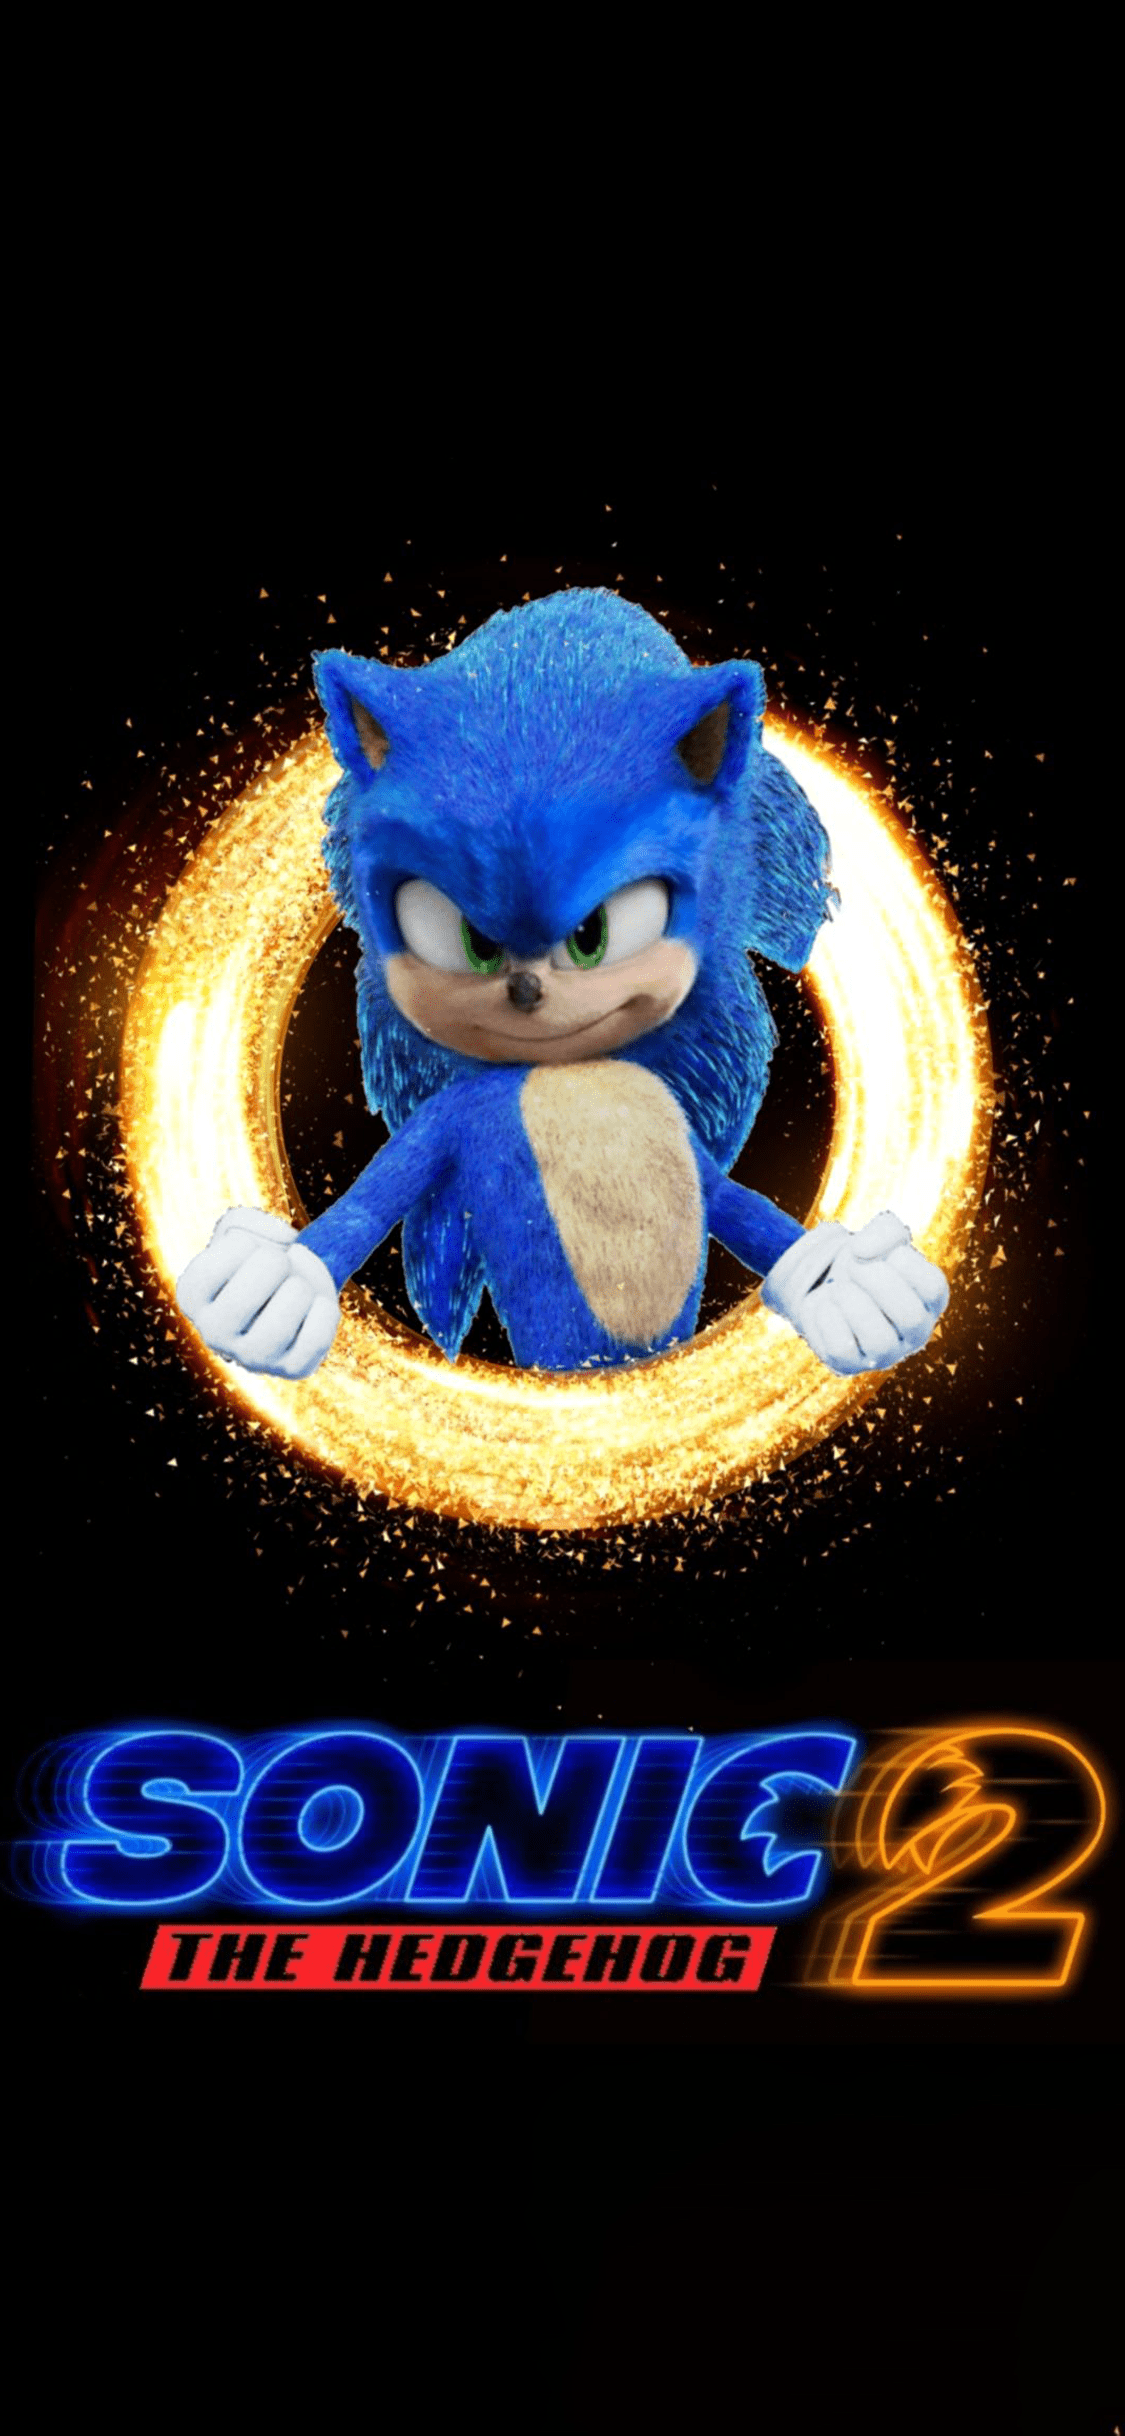 Sonic the hedgehog 2019 movie poster - Sonic